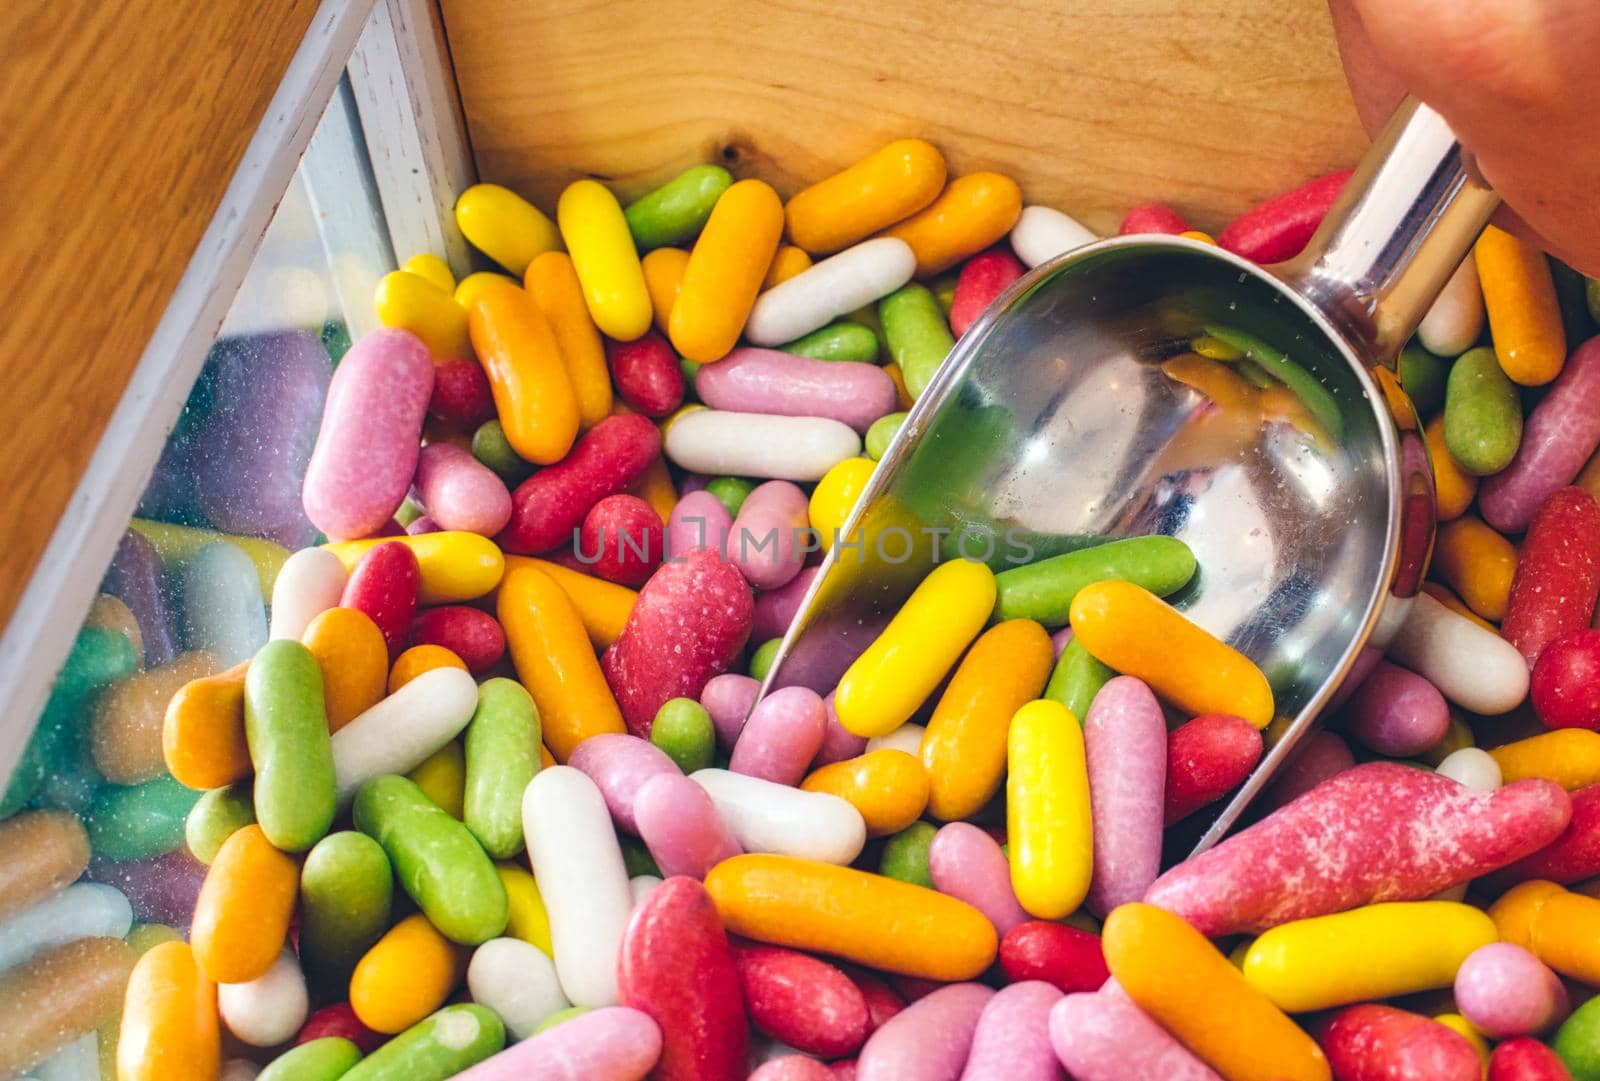 Close-up of multi-colored candy sticks / sweets with a hand filling a scoop from a wooden box